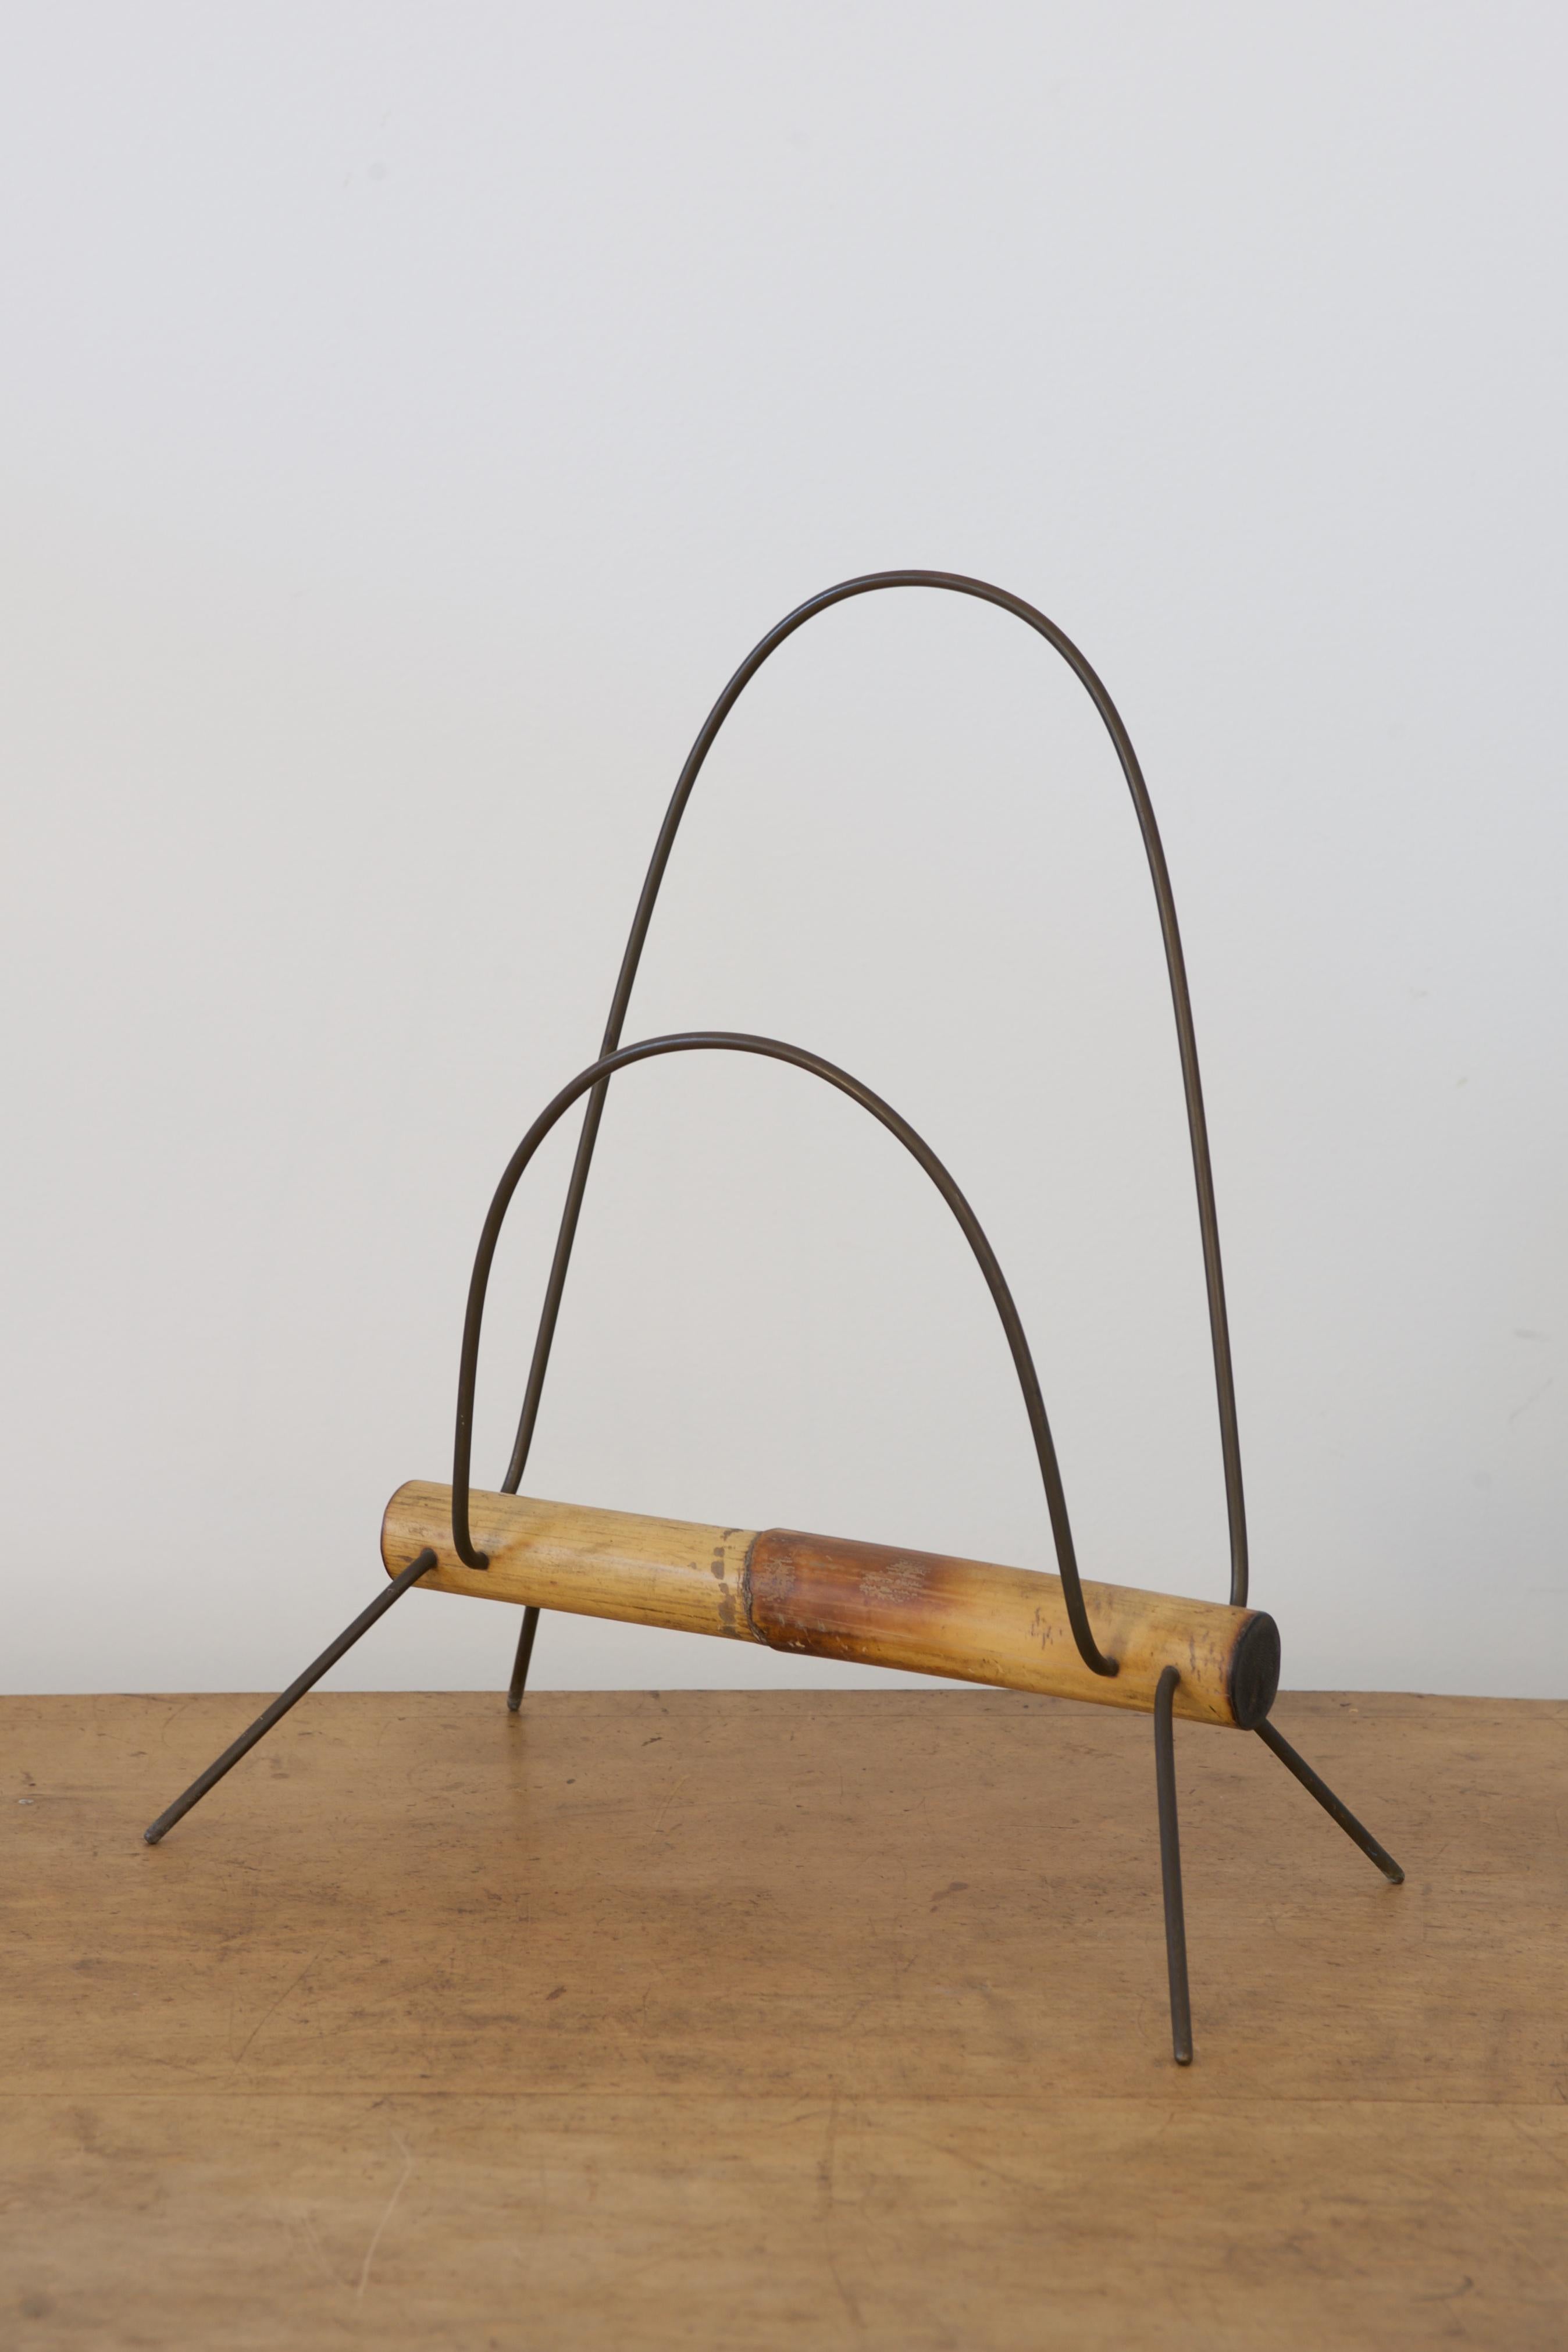 Rare newspaper holder, magazine rack no 4020
by Carl Auböck
Patinated brass, bamboo
Measures: 41 x 20.5 cm, H 45 cm / 16.14 x 8.07 in, h 17.71 in,

1950s

Literature: Clemens Kois; Carl Auböck - The Workshop, powerHouse Books 2012, page 64.